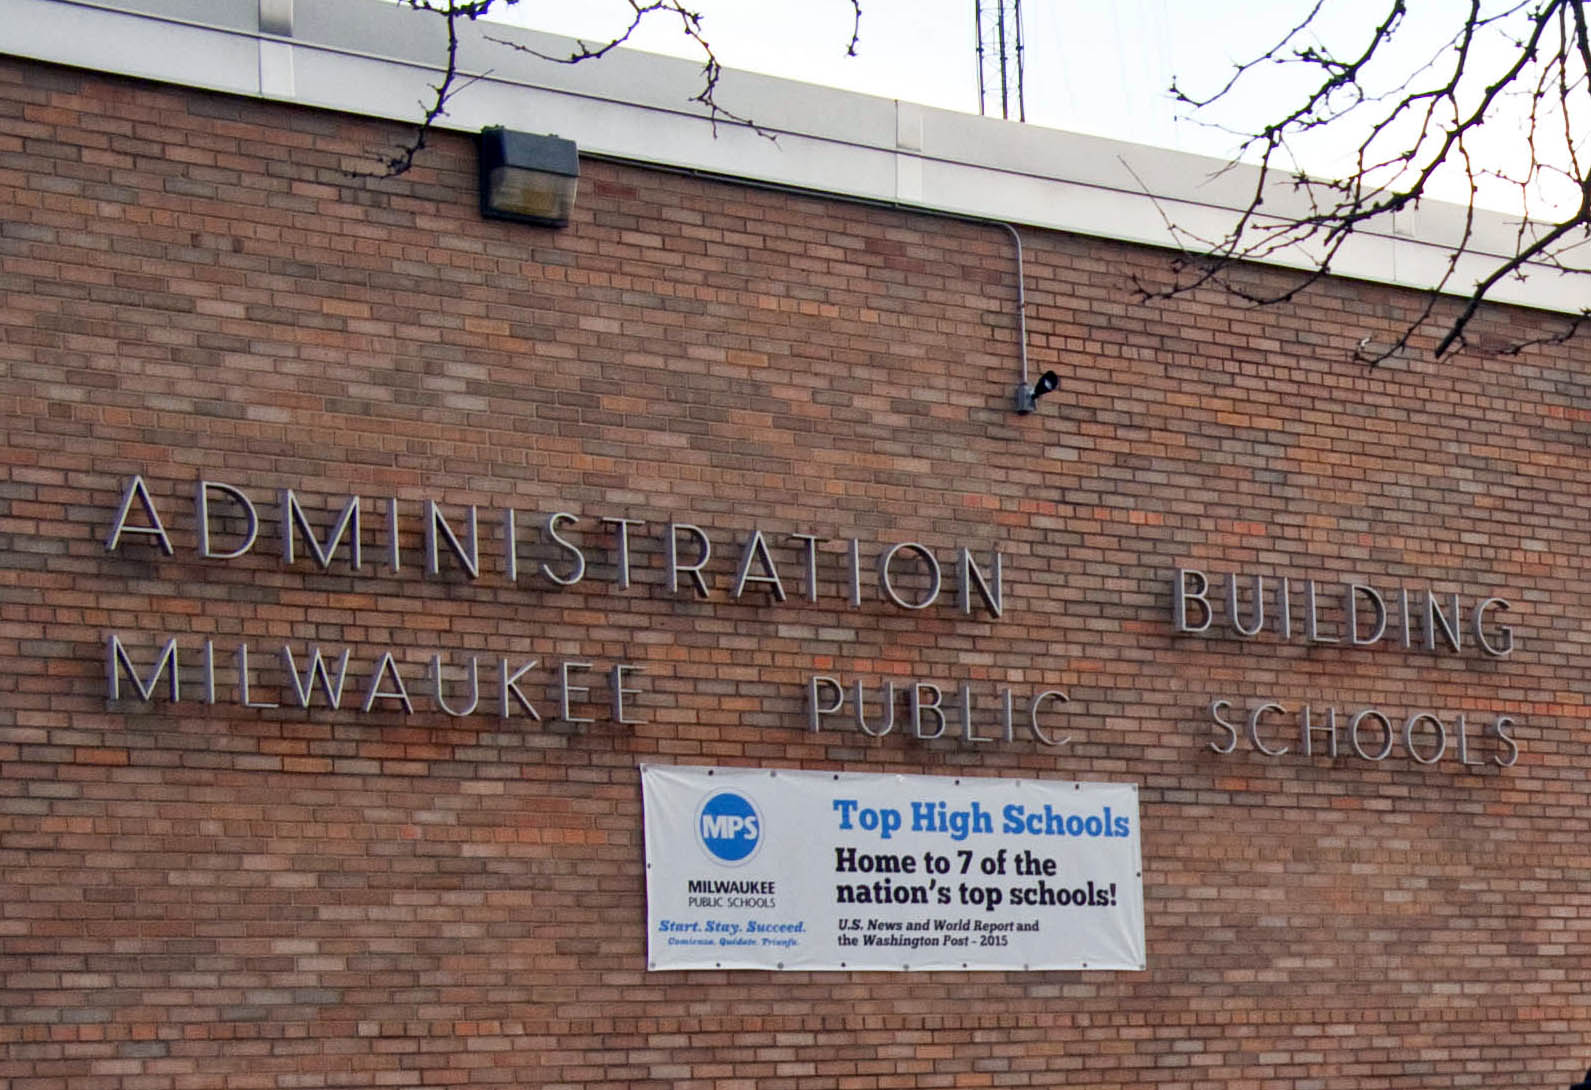 Federal lawsuit details alleged abuse of first grader by principal for having gay parents